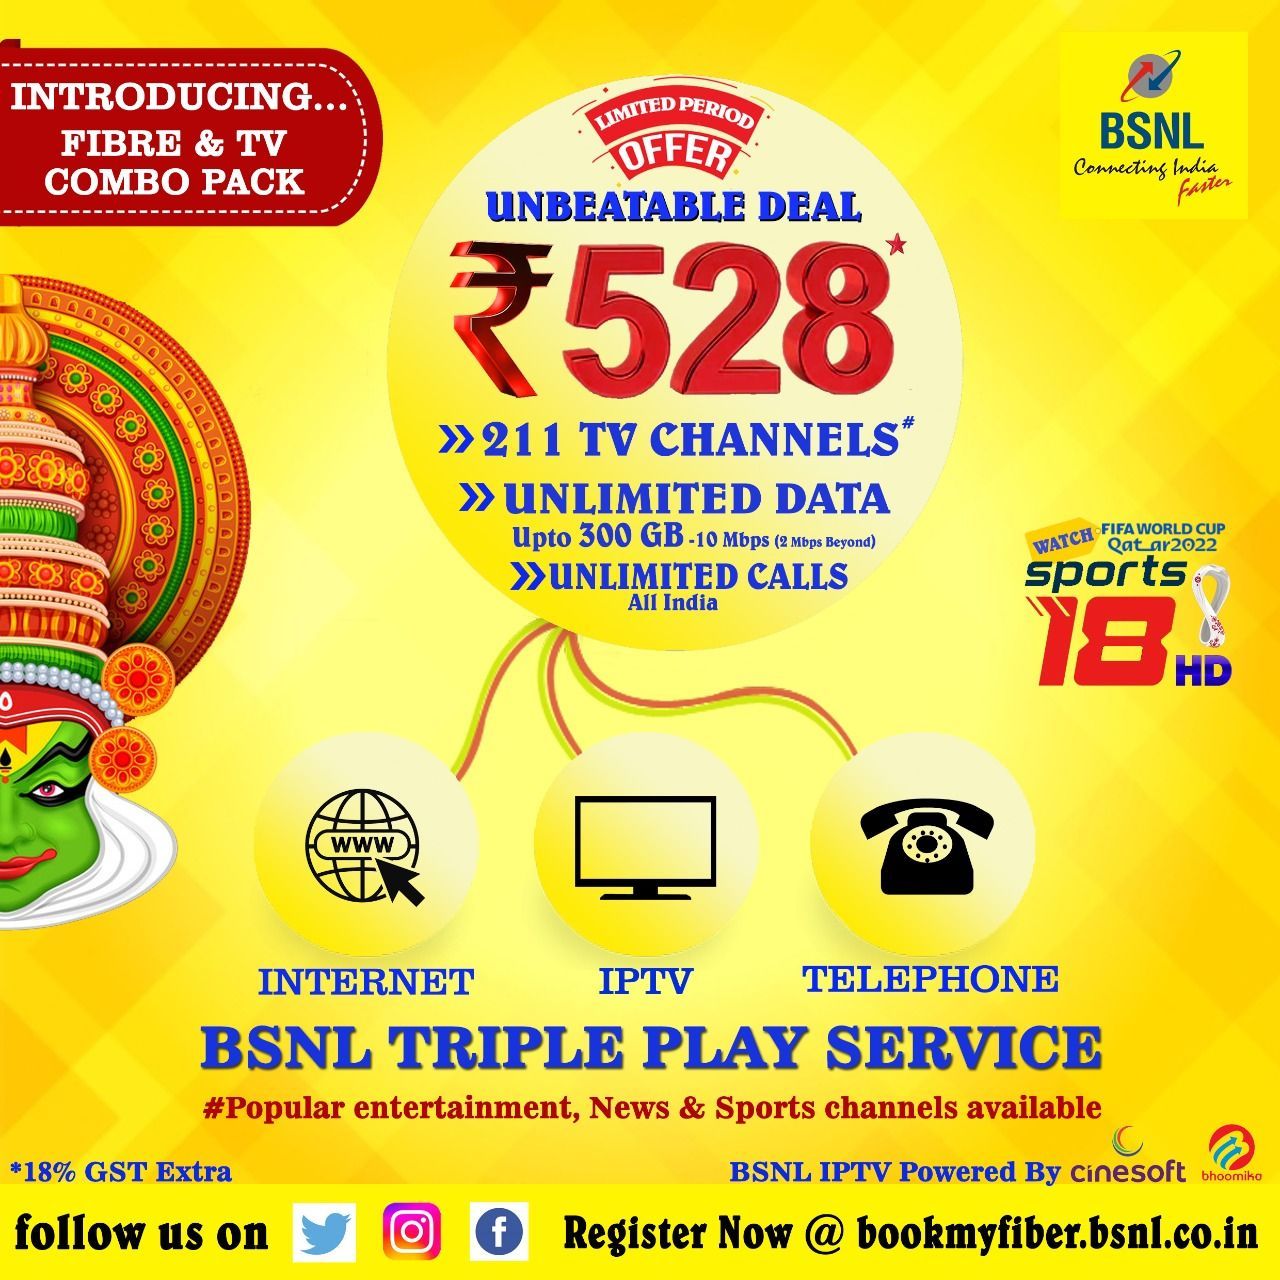 210gb data and 110 days validity bsnl rs 666 plan details compete airtel reliance jio recharge 